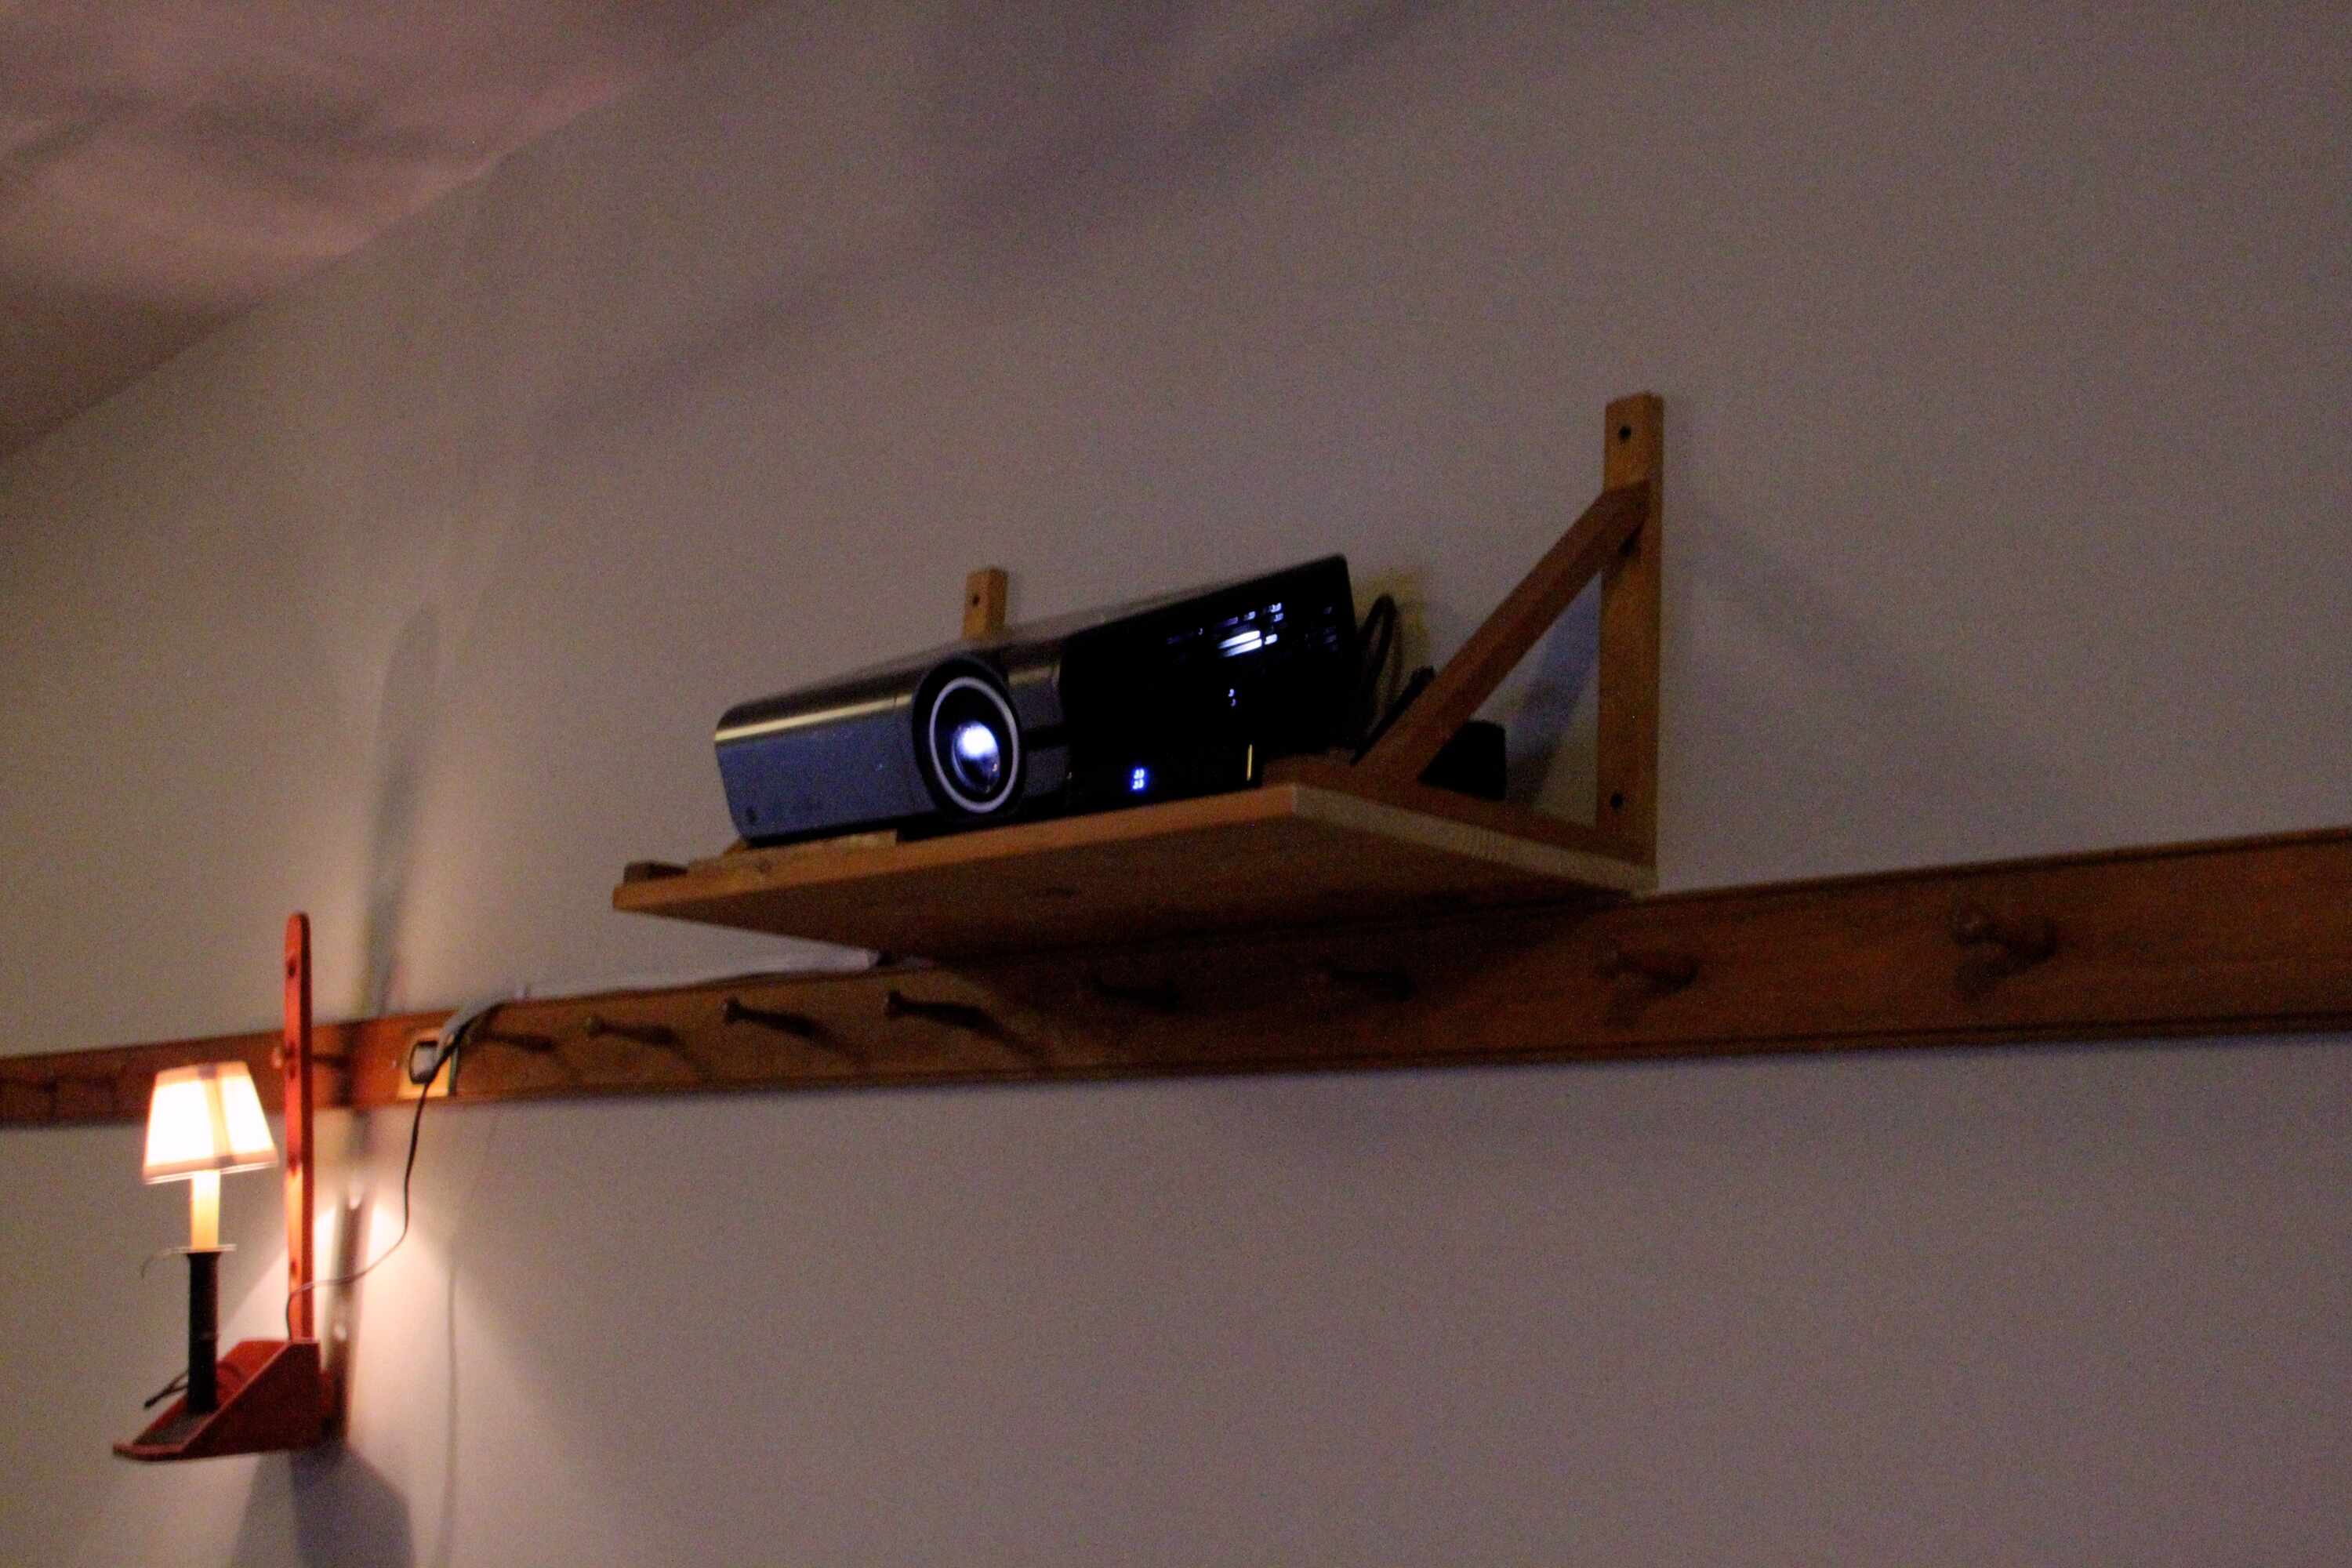 How To Mount Projector On Wall